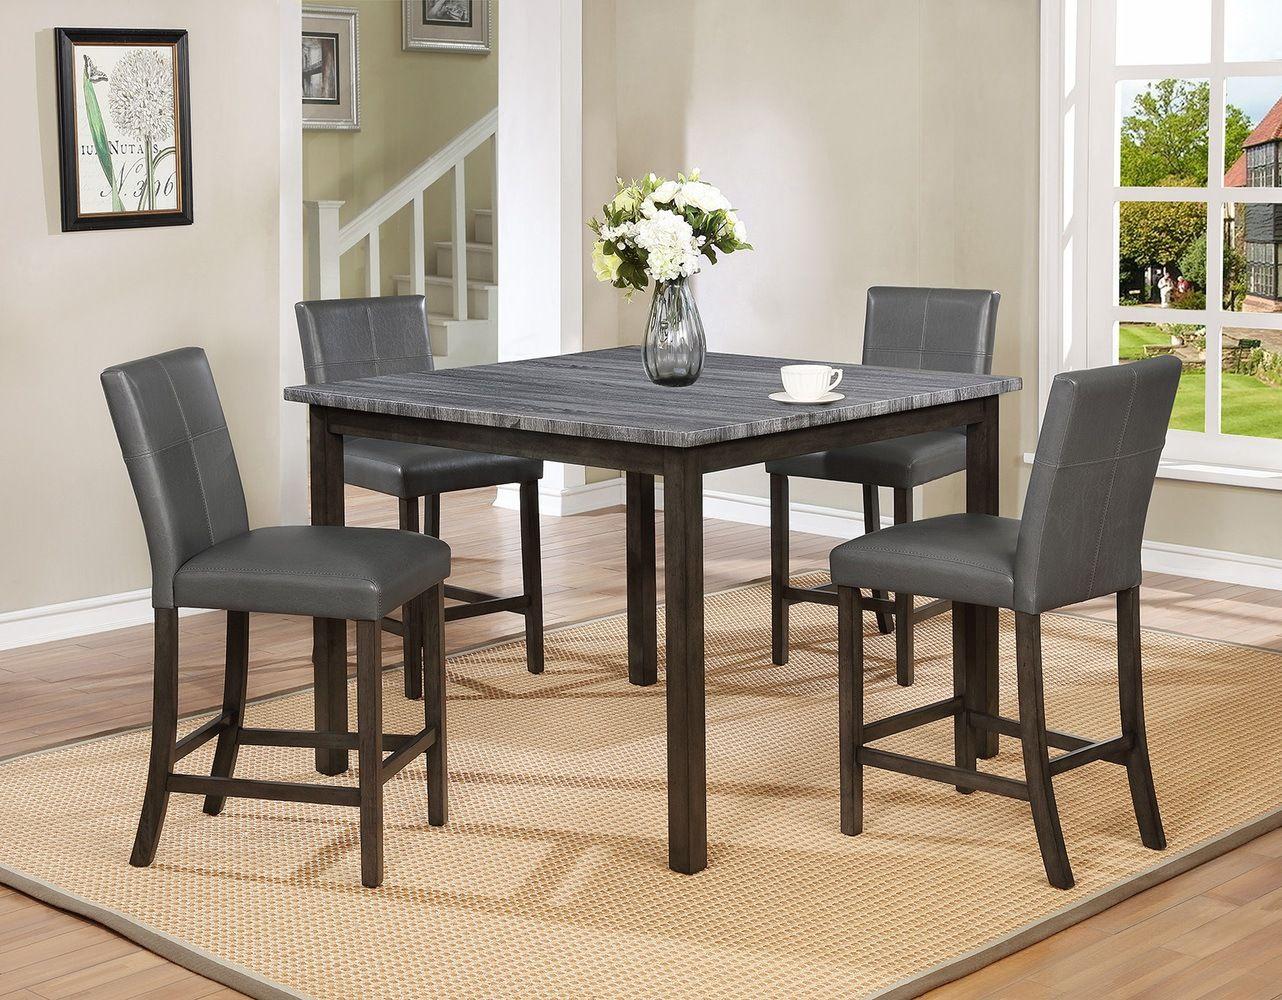 Modern, Simple Counter Dining Set Pompei 2877GY-T-4848-5pcs in Dark Gray, Brown 